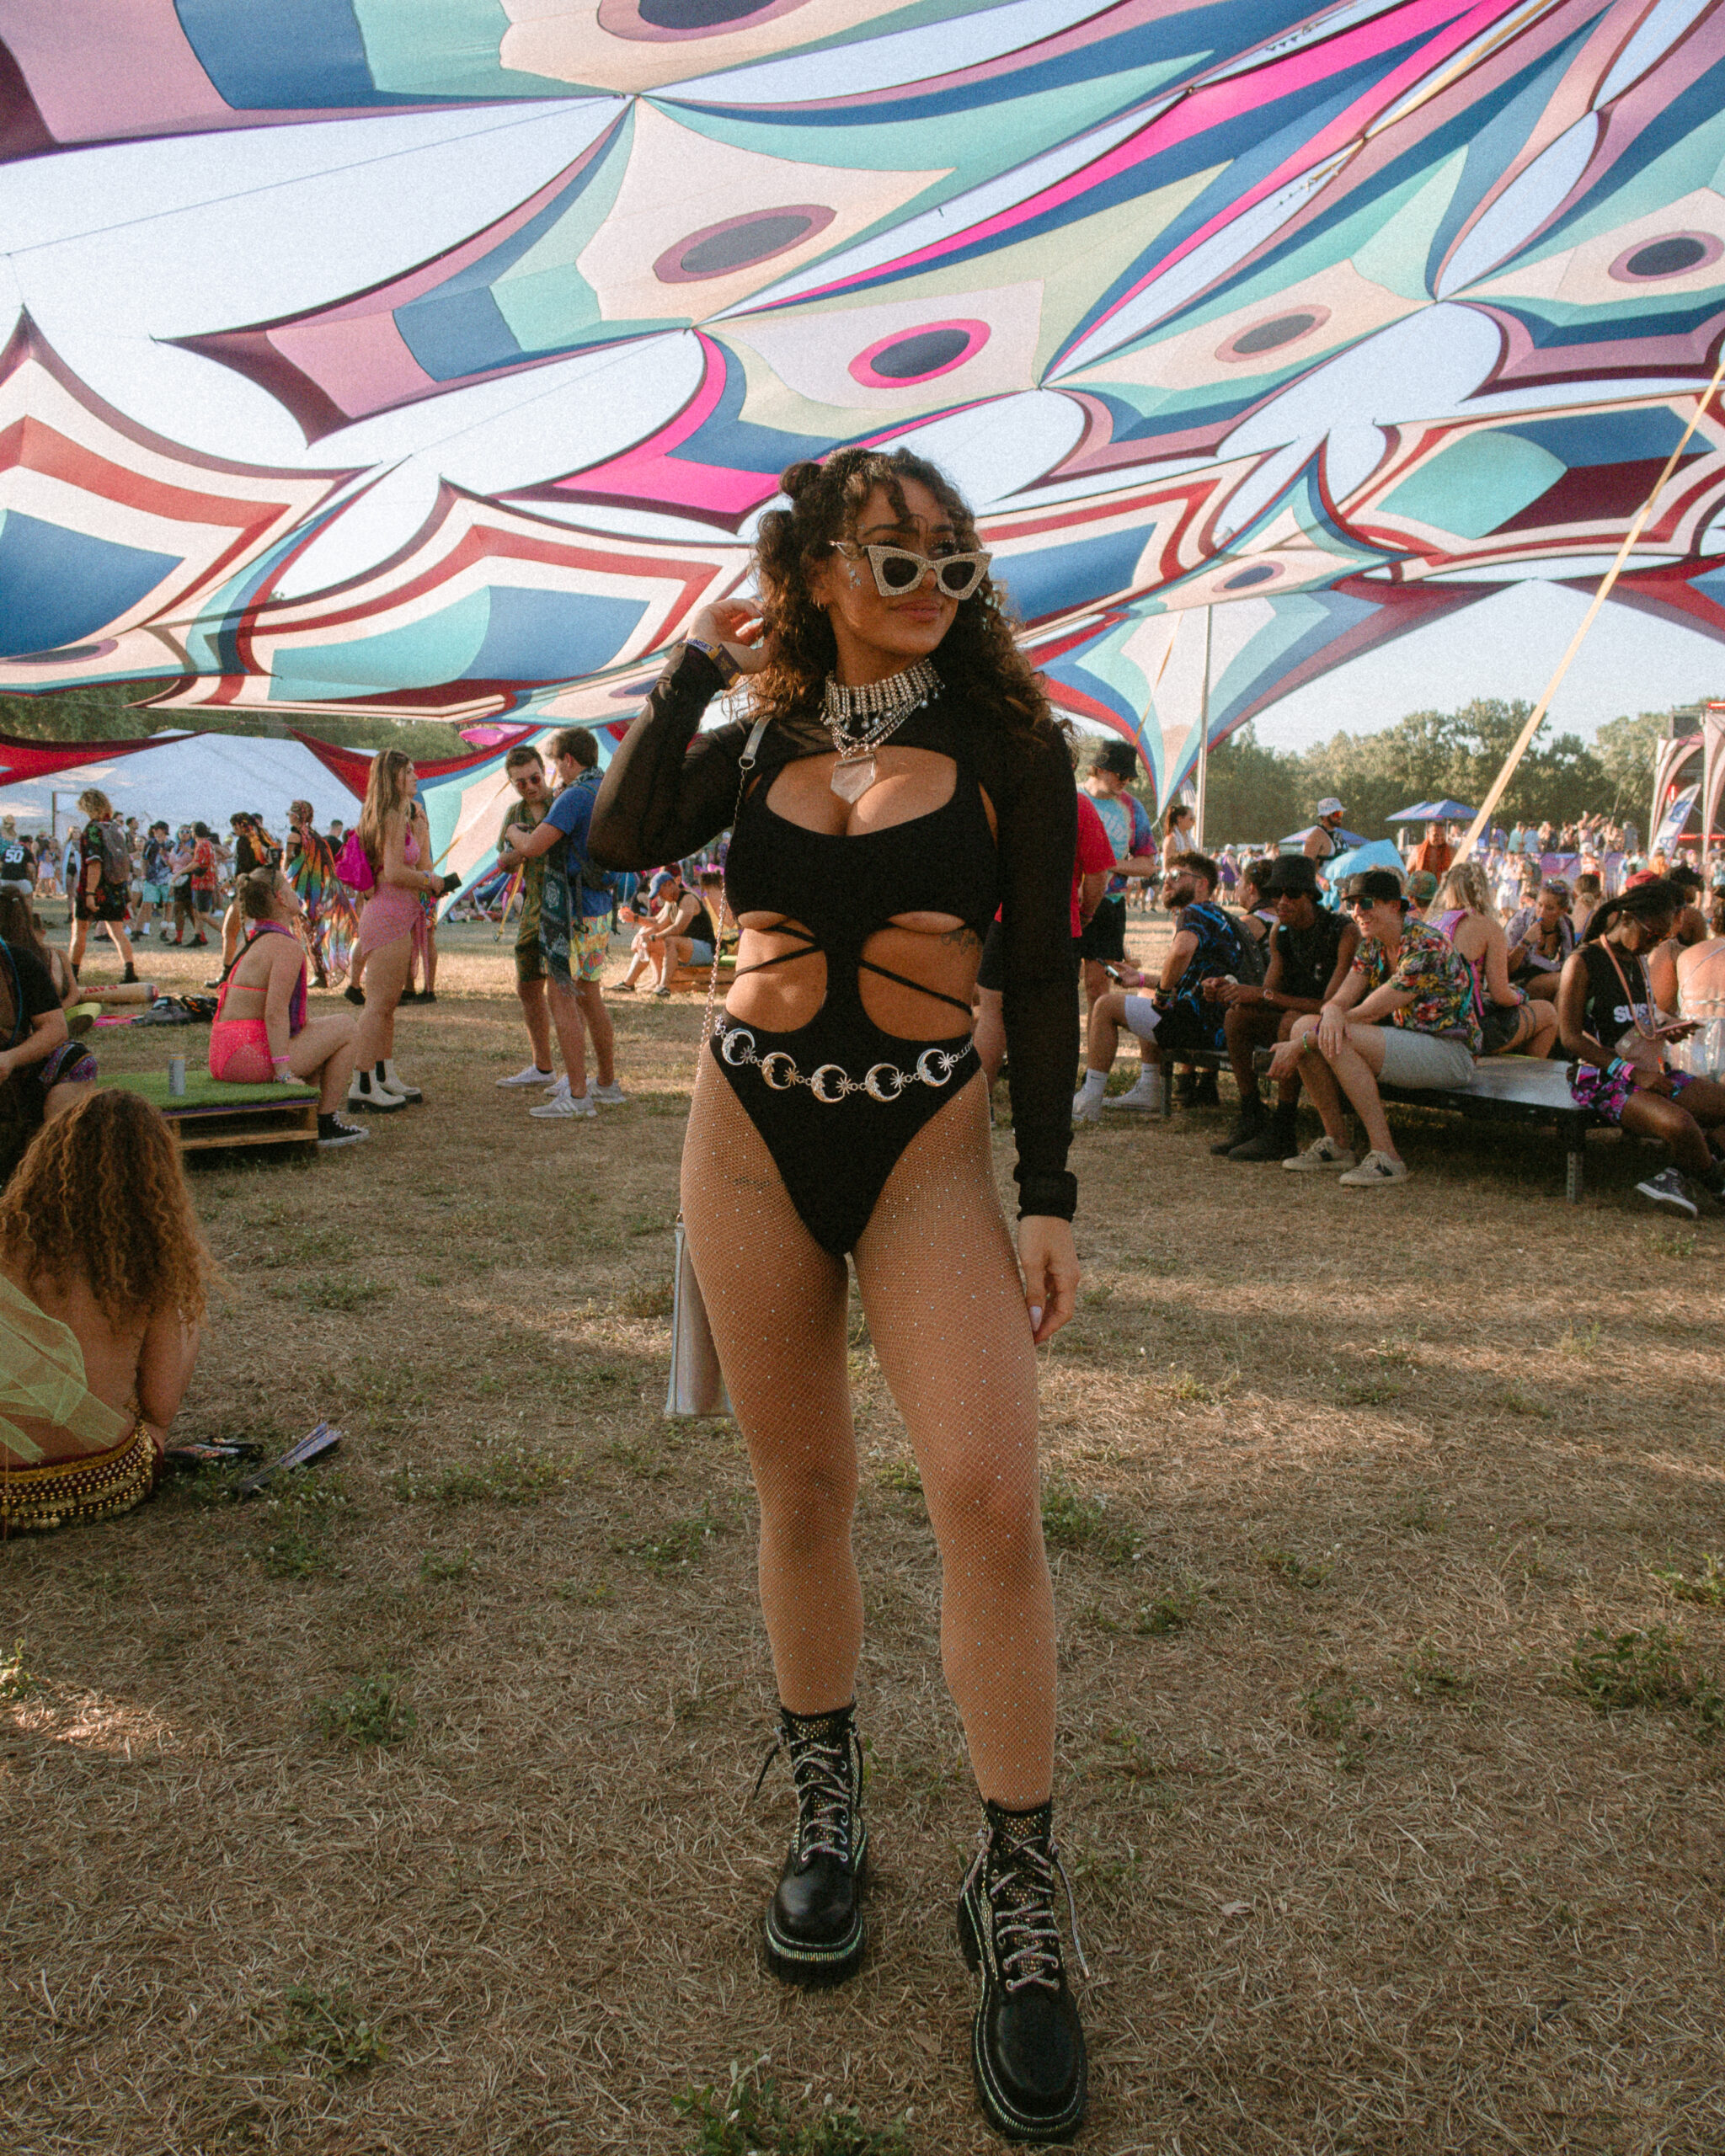 black outfit rave raver girl chain belt grunge fashion sunset music festival 2022 outfit ideas boho western music festival brown burning man etc orlando idclv rave outfit inspo inspiration ideas